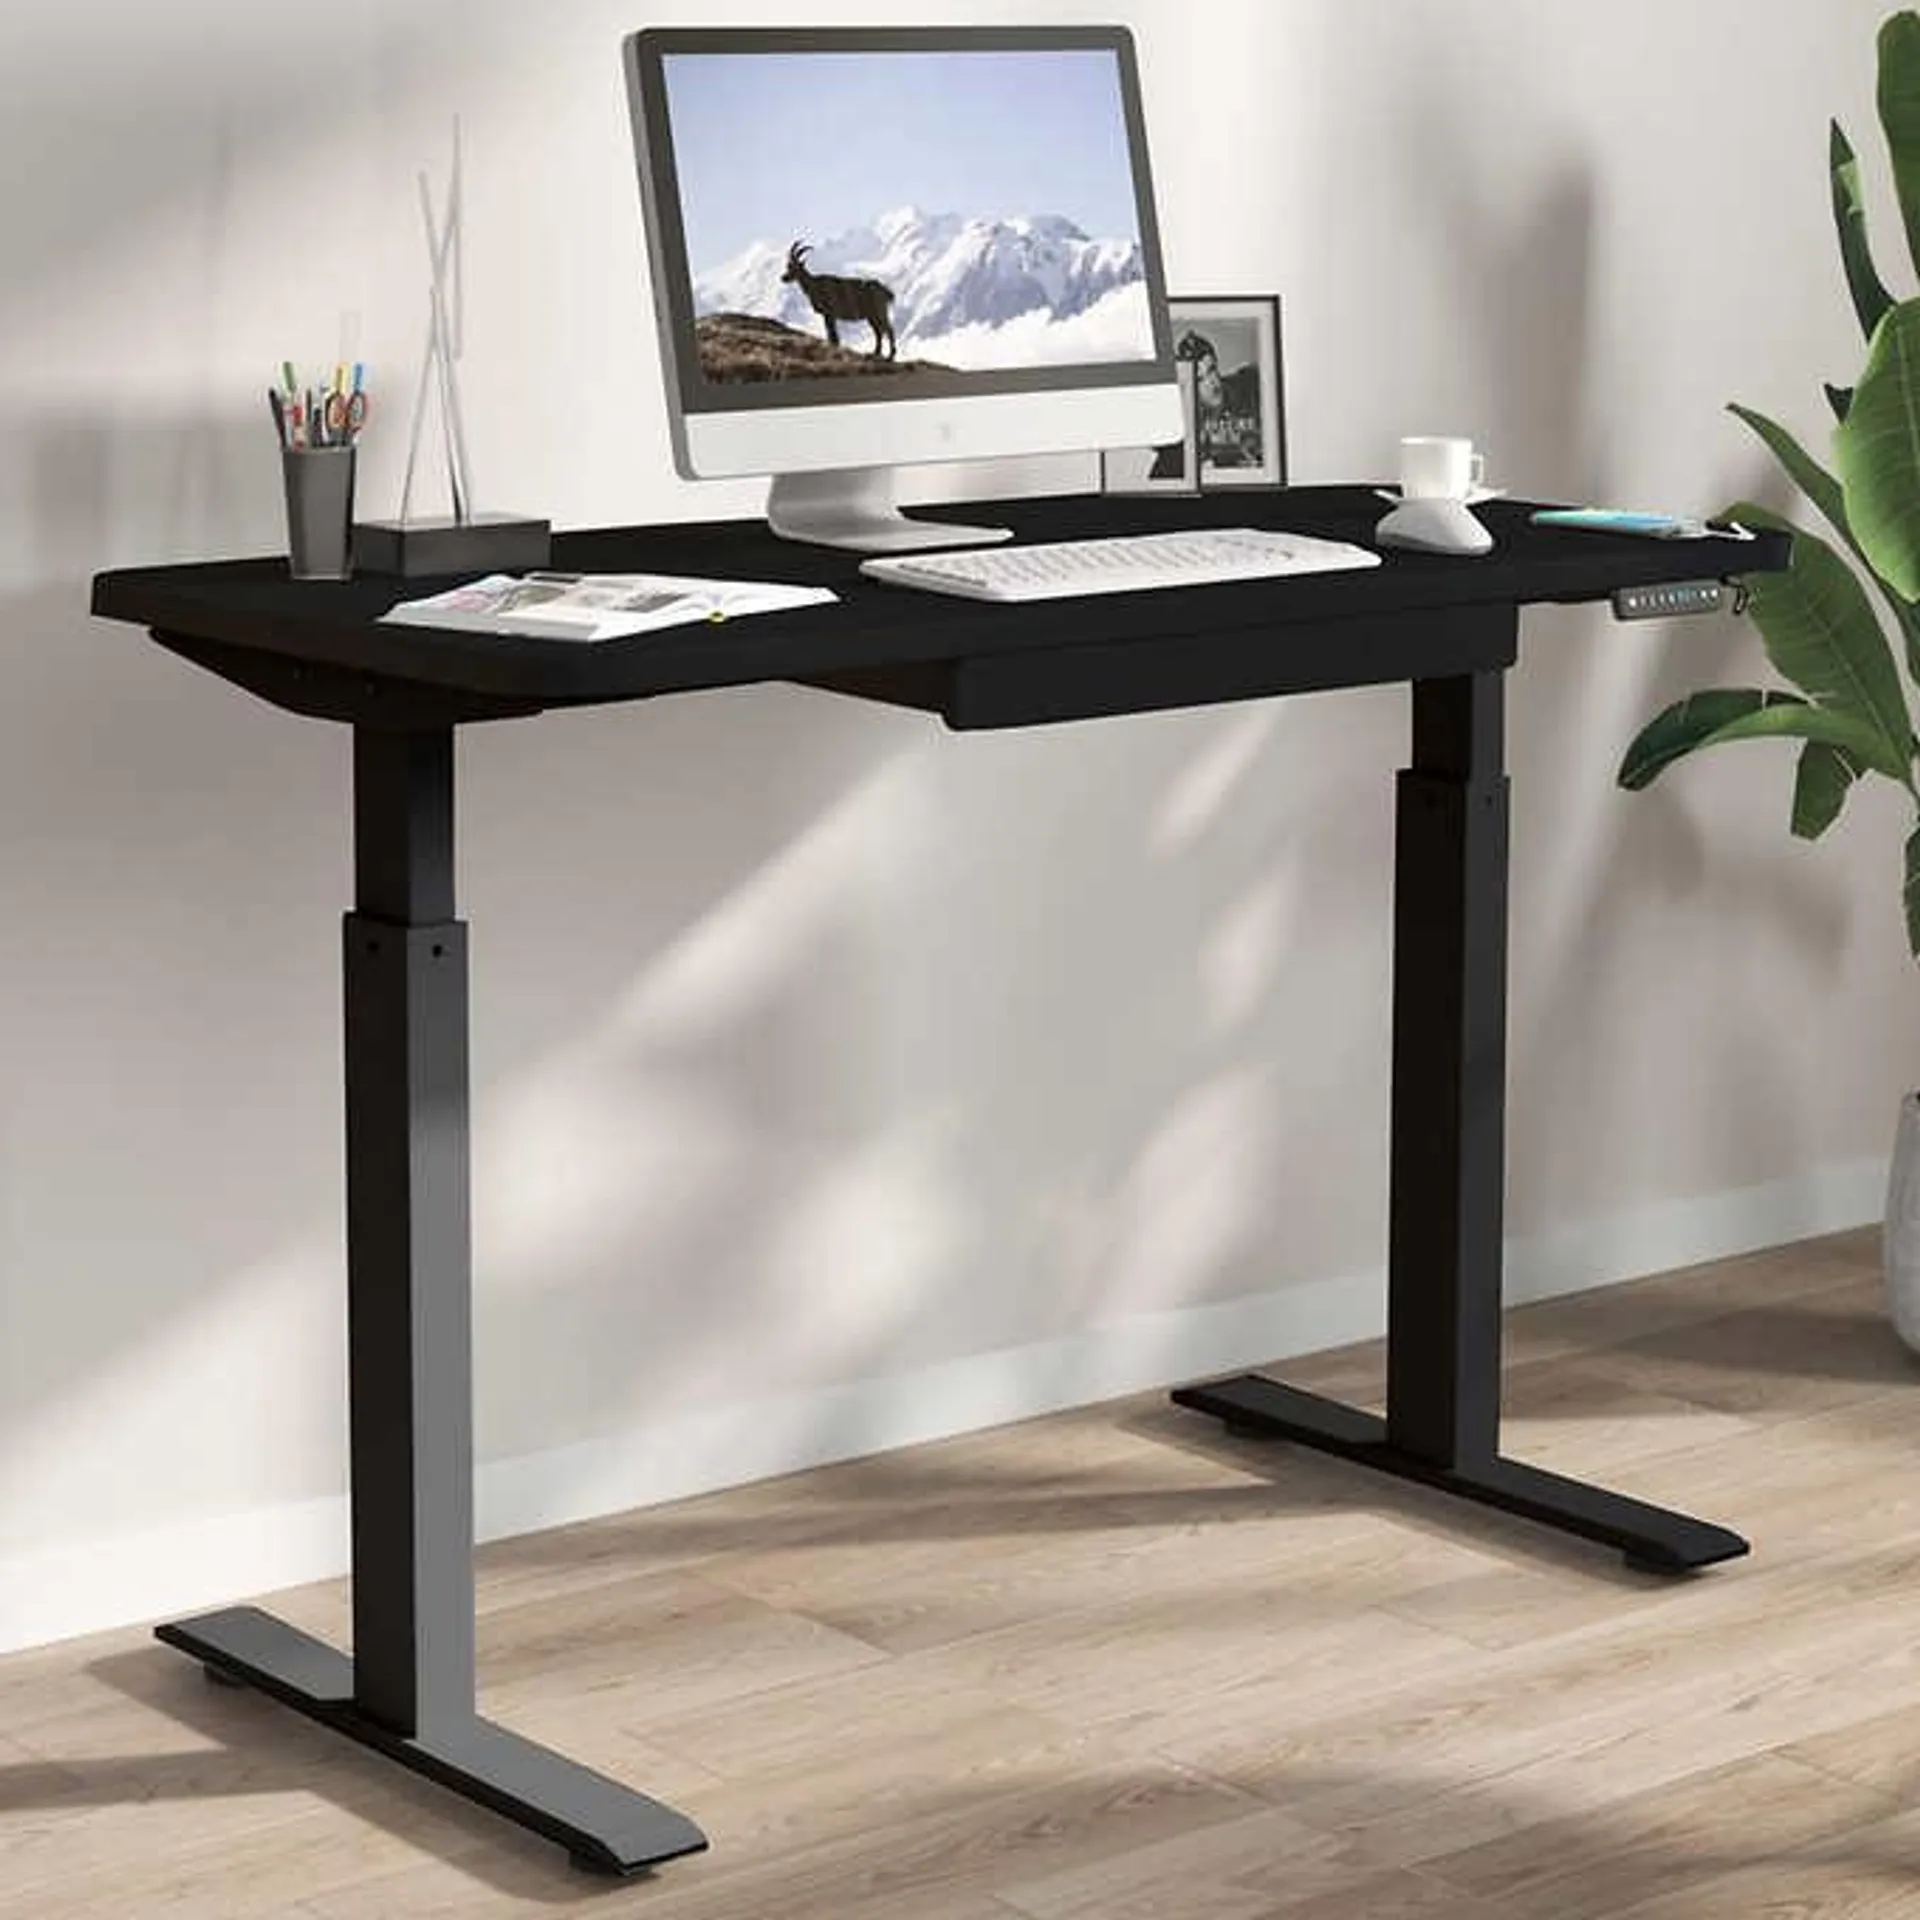 Motionwise 121.9 cm × 61 cm (48 in. × 24 in.) Height Adjustable Standing Desk